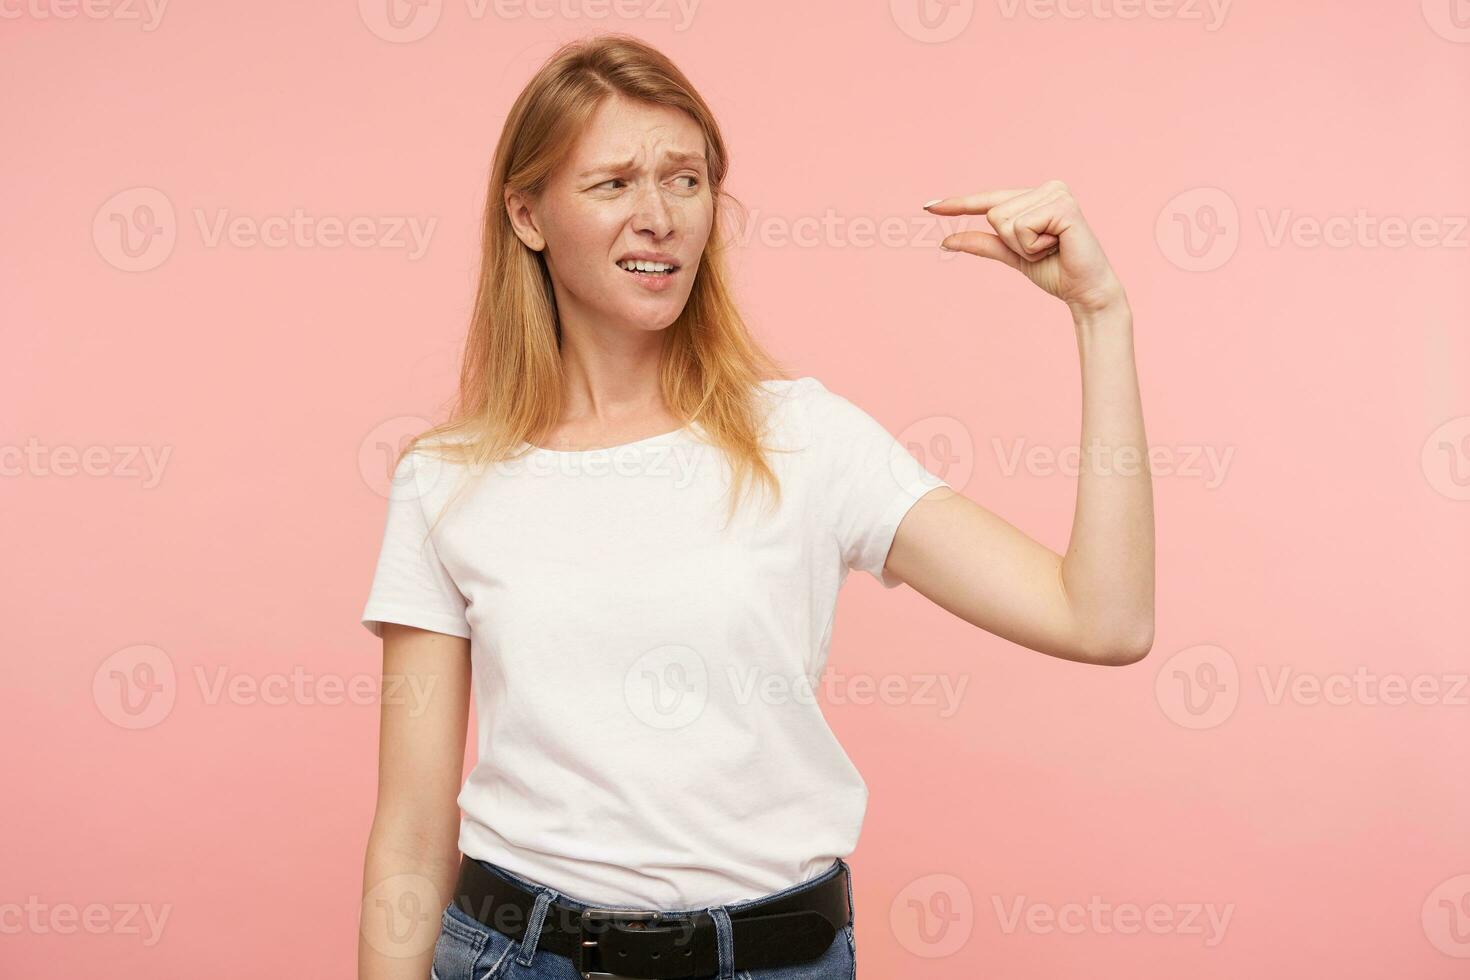 Disappointed young attractive long haired redhead woman grimacing her face while measuring something invisible with fingers, standing against pink background photo